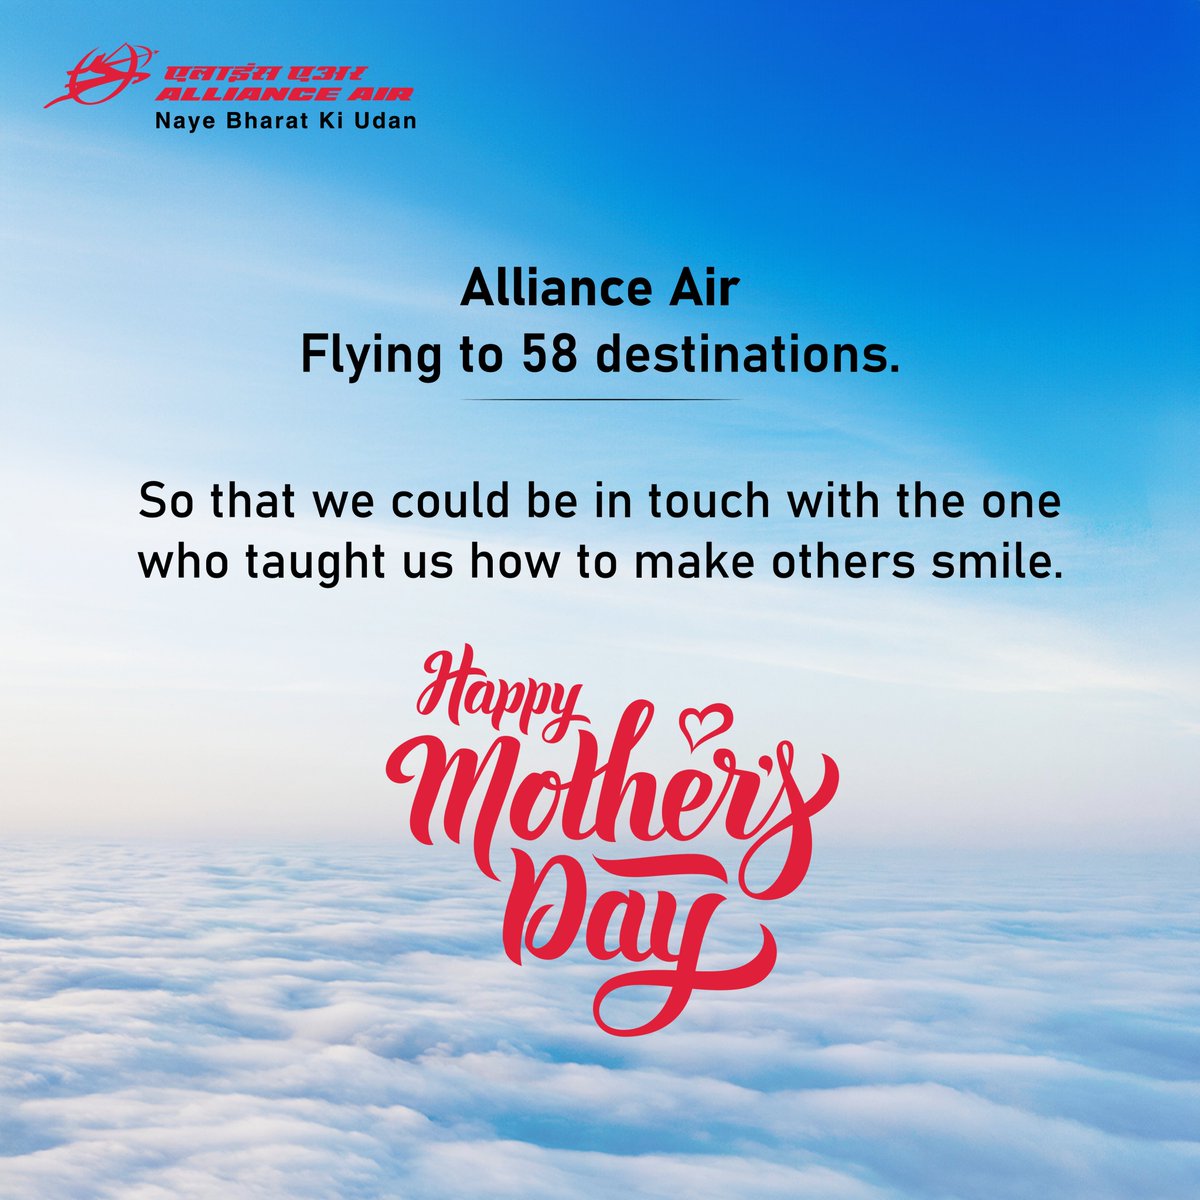 Happy Mother's Day to the guiding lights who taught us to spread joy with every journey. #Explore #Travel #YourWindowToIndia #aviation #dekhoapnadesh #india #travelling #vacations #mothersday2024 #MothersDay